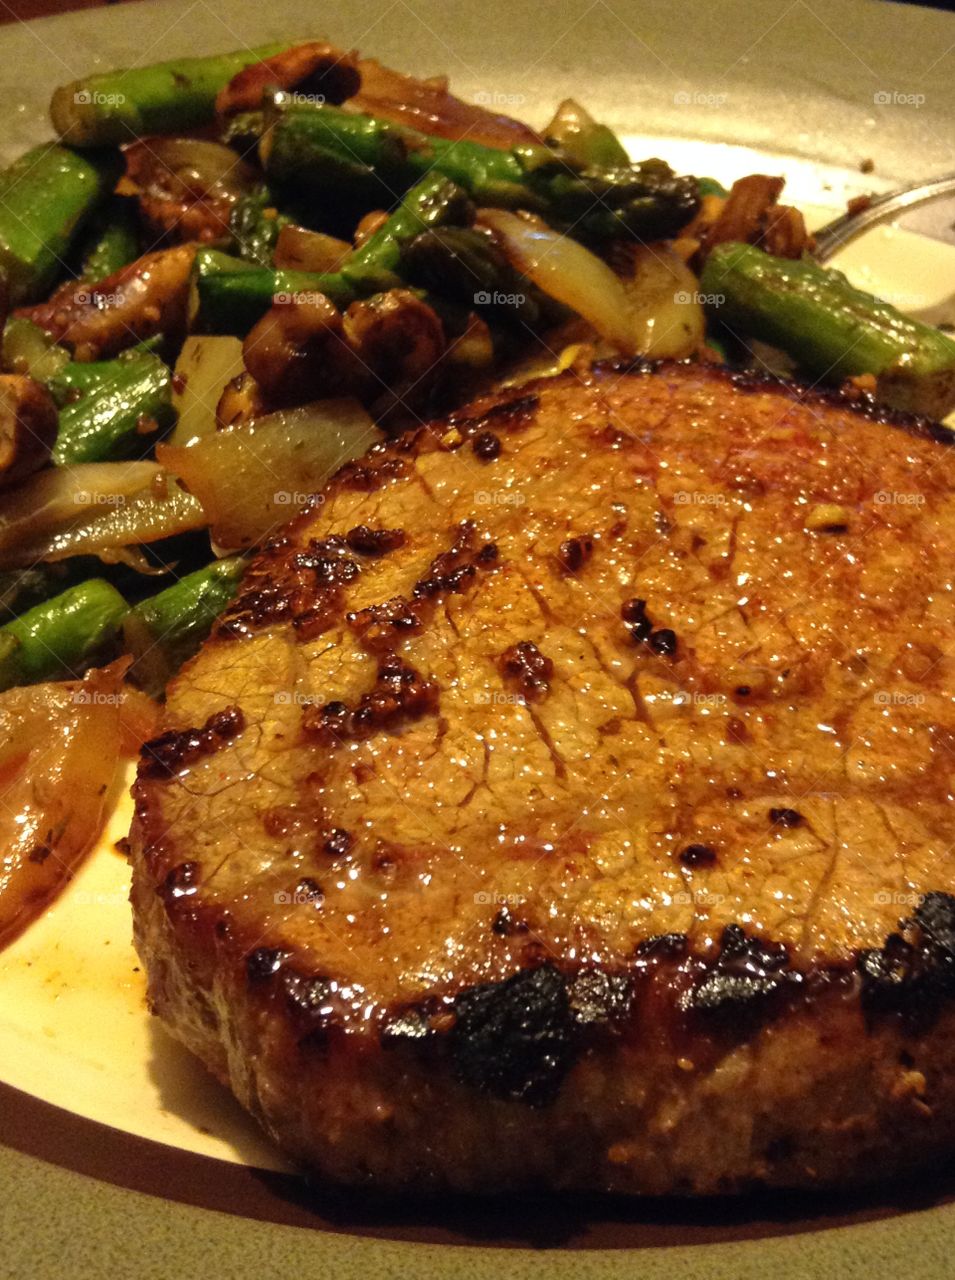 Close up before chowing down. Beef steak with a side of vegetables.